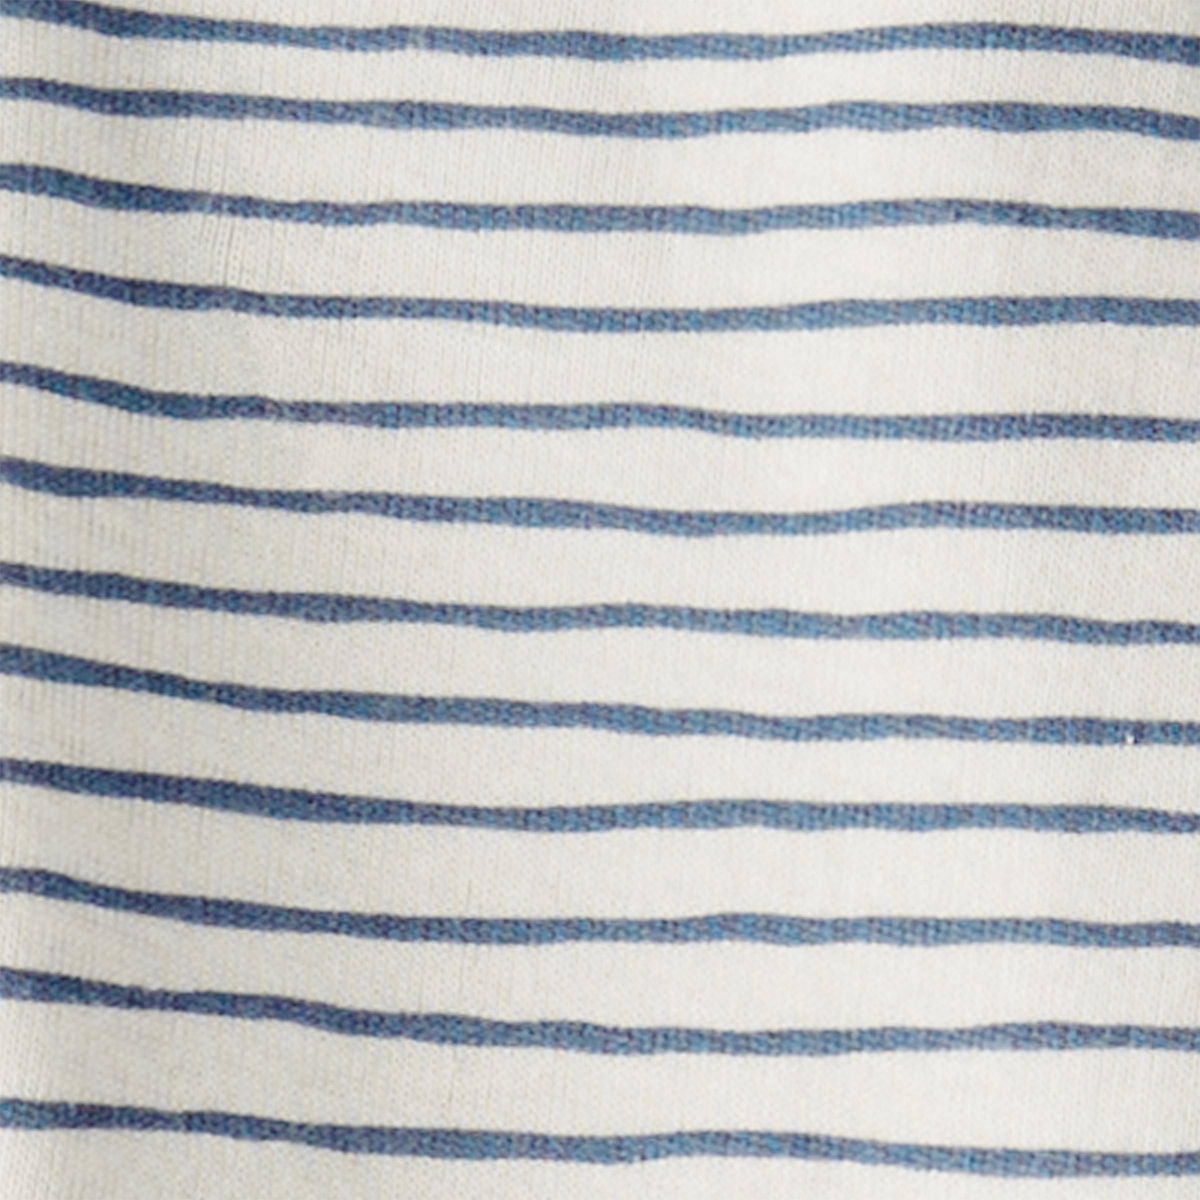 Little Planet by Carter’s Organic Baby Striped Sleep N' Play - White/Blue | Target